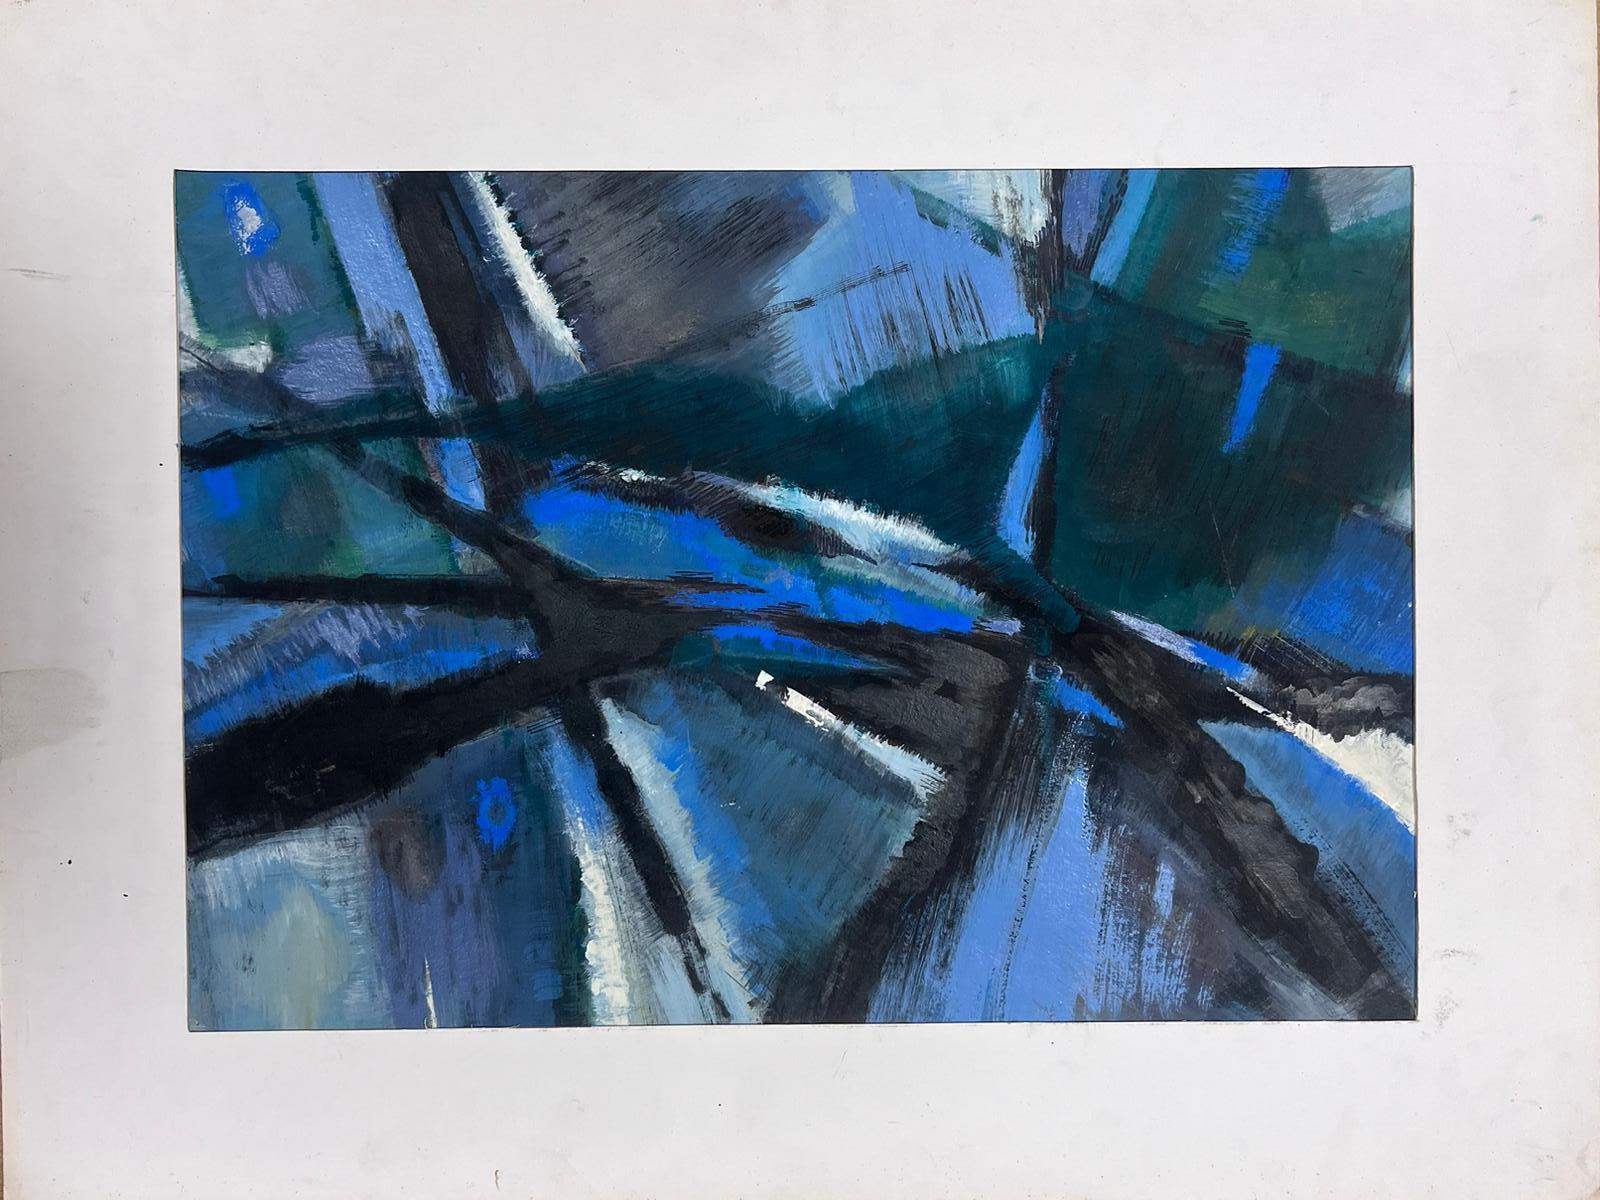 Abstract Expressionist composition
by Andre Guillou (French 1925-2017) 
signed oil on board stuck on board, mounted
mount: 19.75 x 25.5 inches
board: 13.75 x 20 inches
provenance: the artists estate, France
condition: very good and sound condition